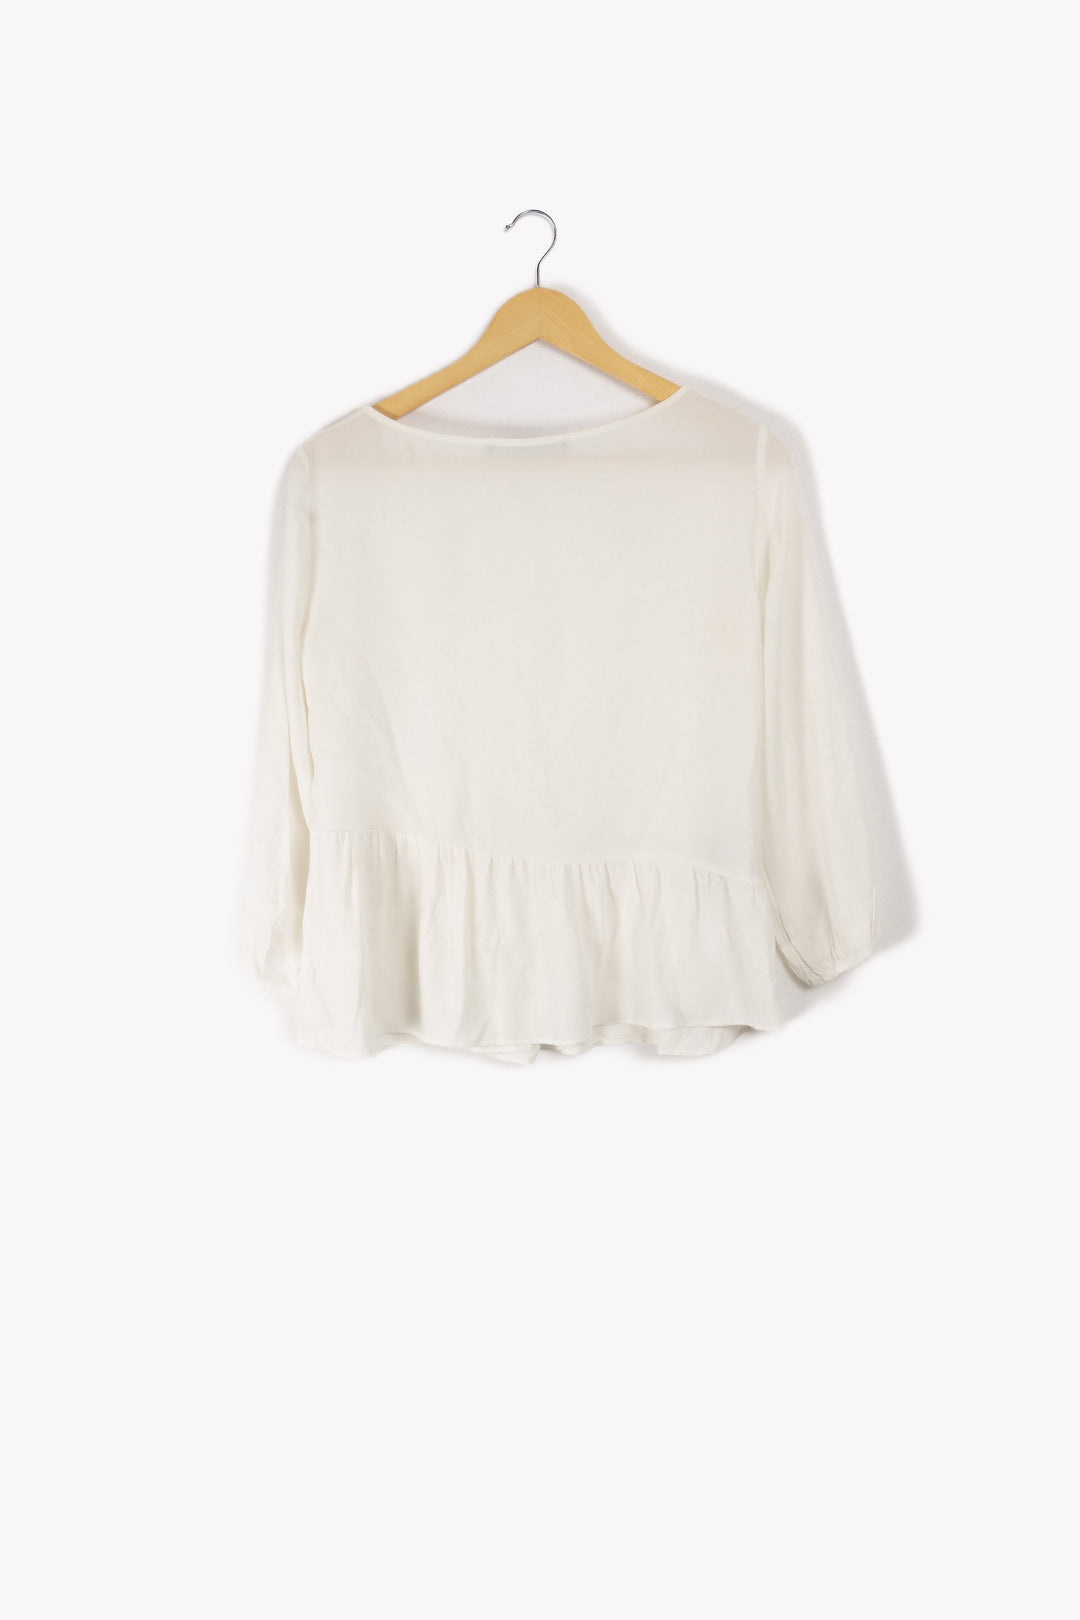 White long sleeve top - XS/34